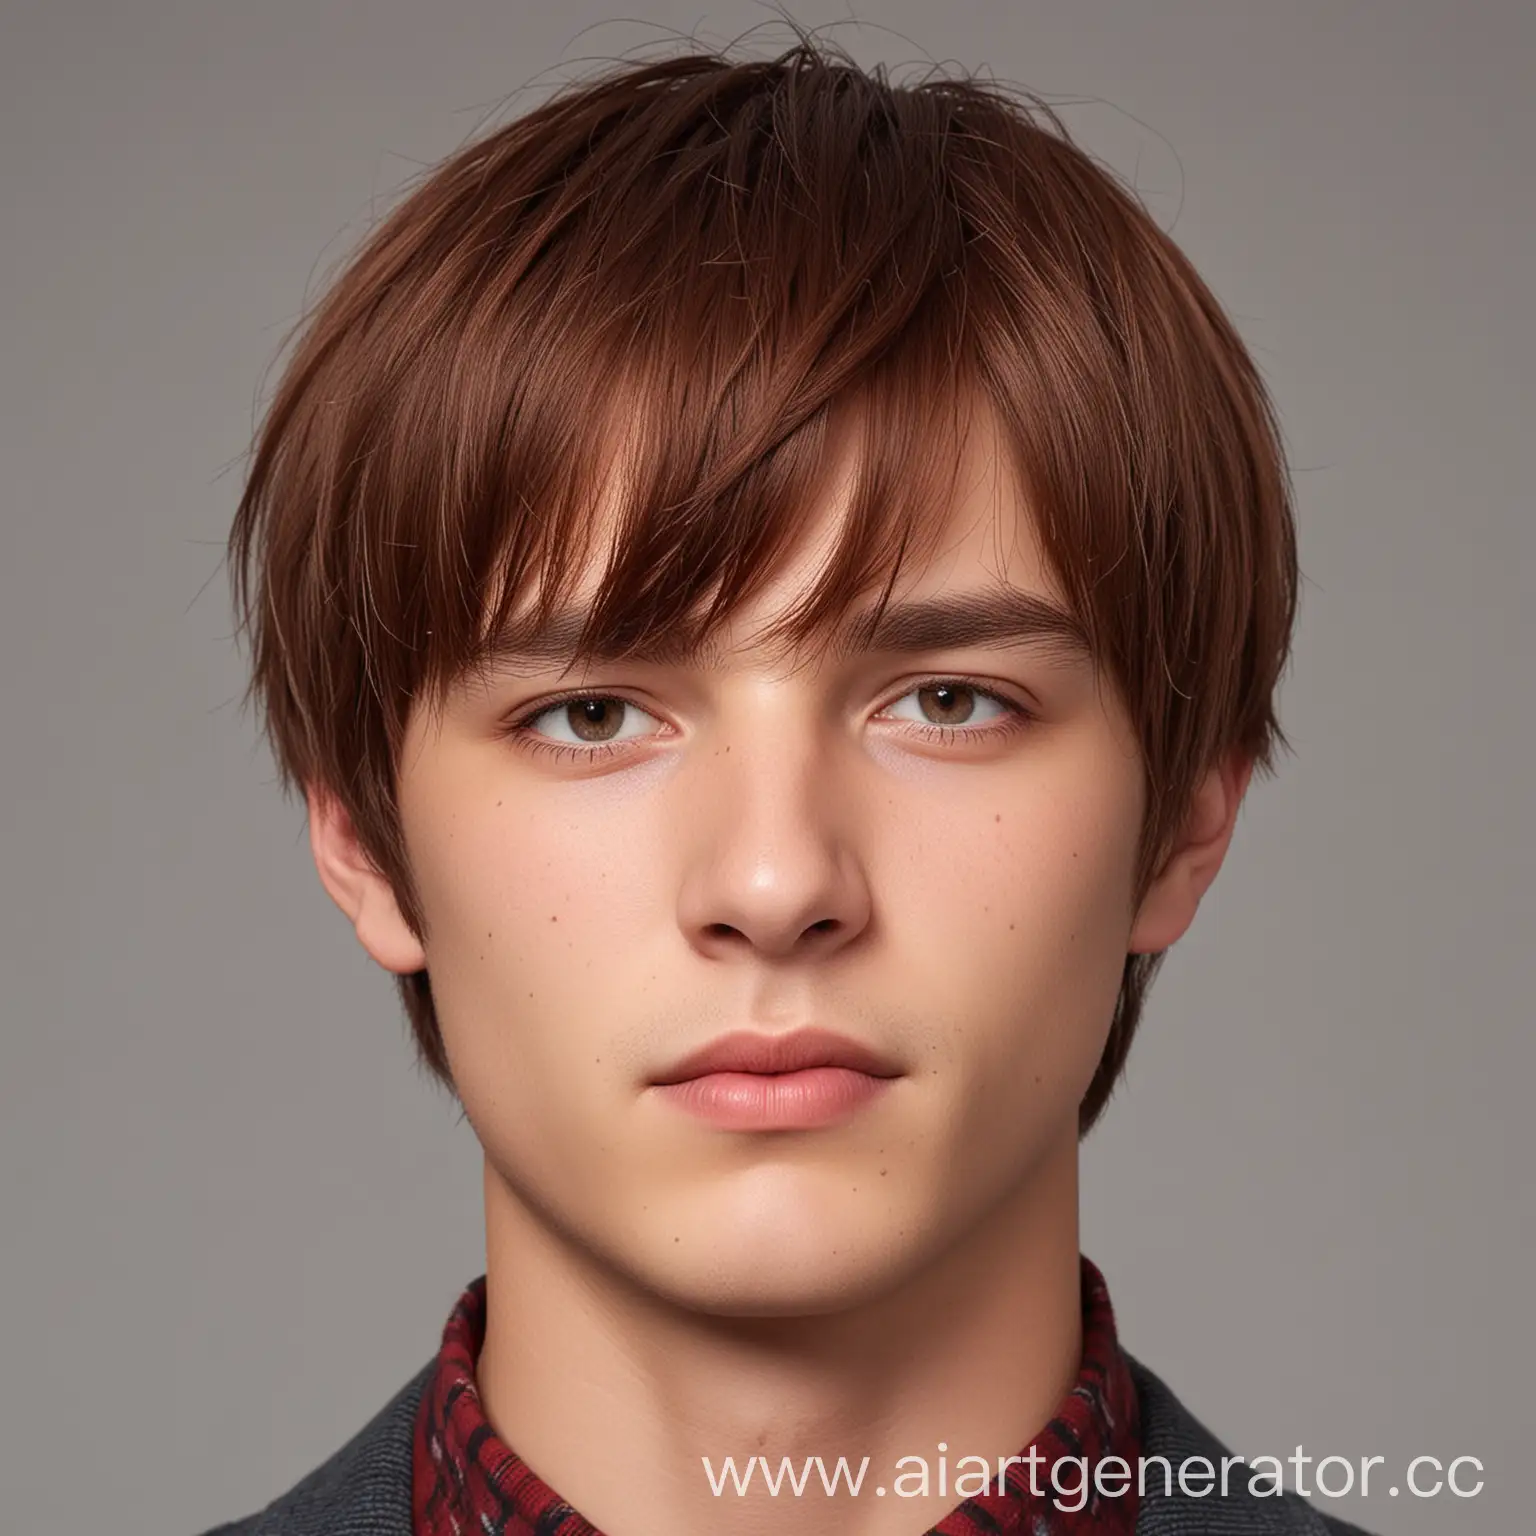 RedHaired-Stocky-Man-with-Side-Bangs-and-Brown-Eyes-Portrait